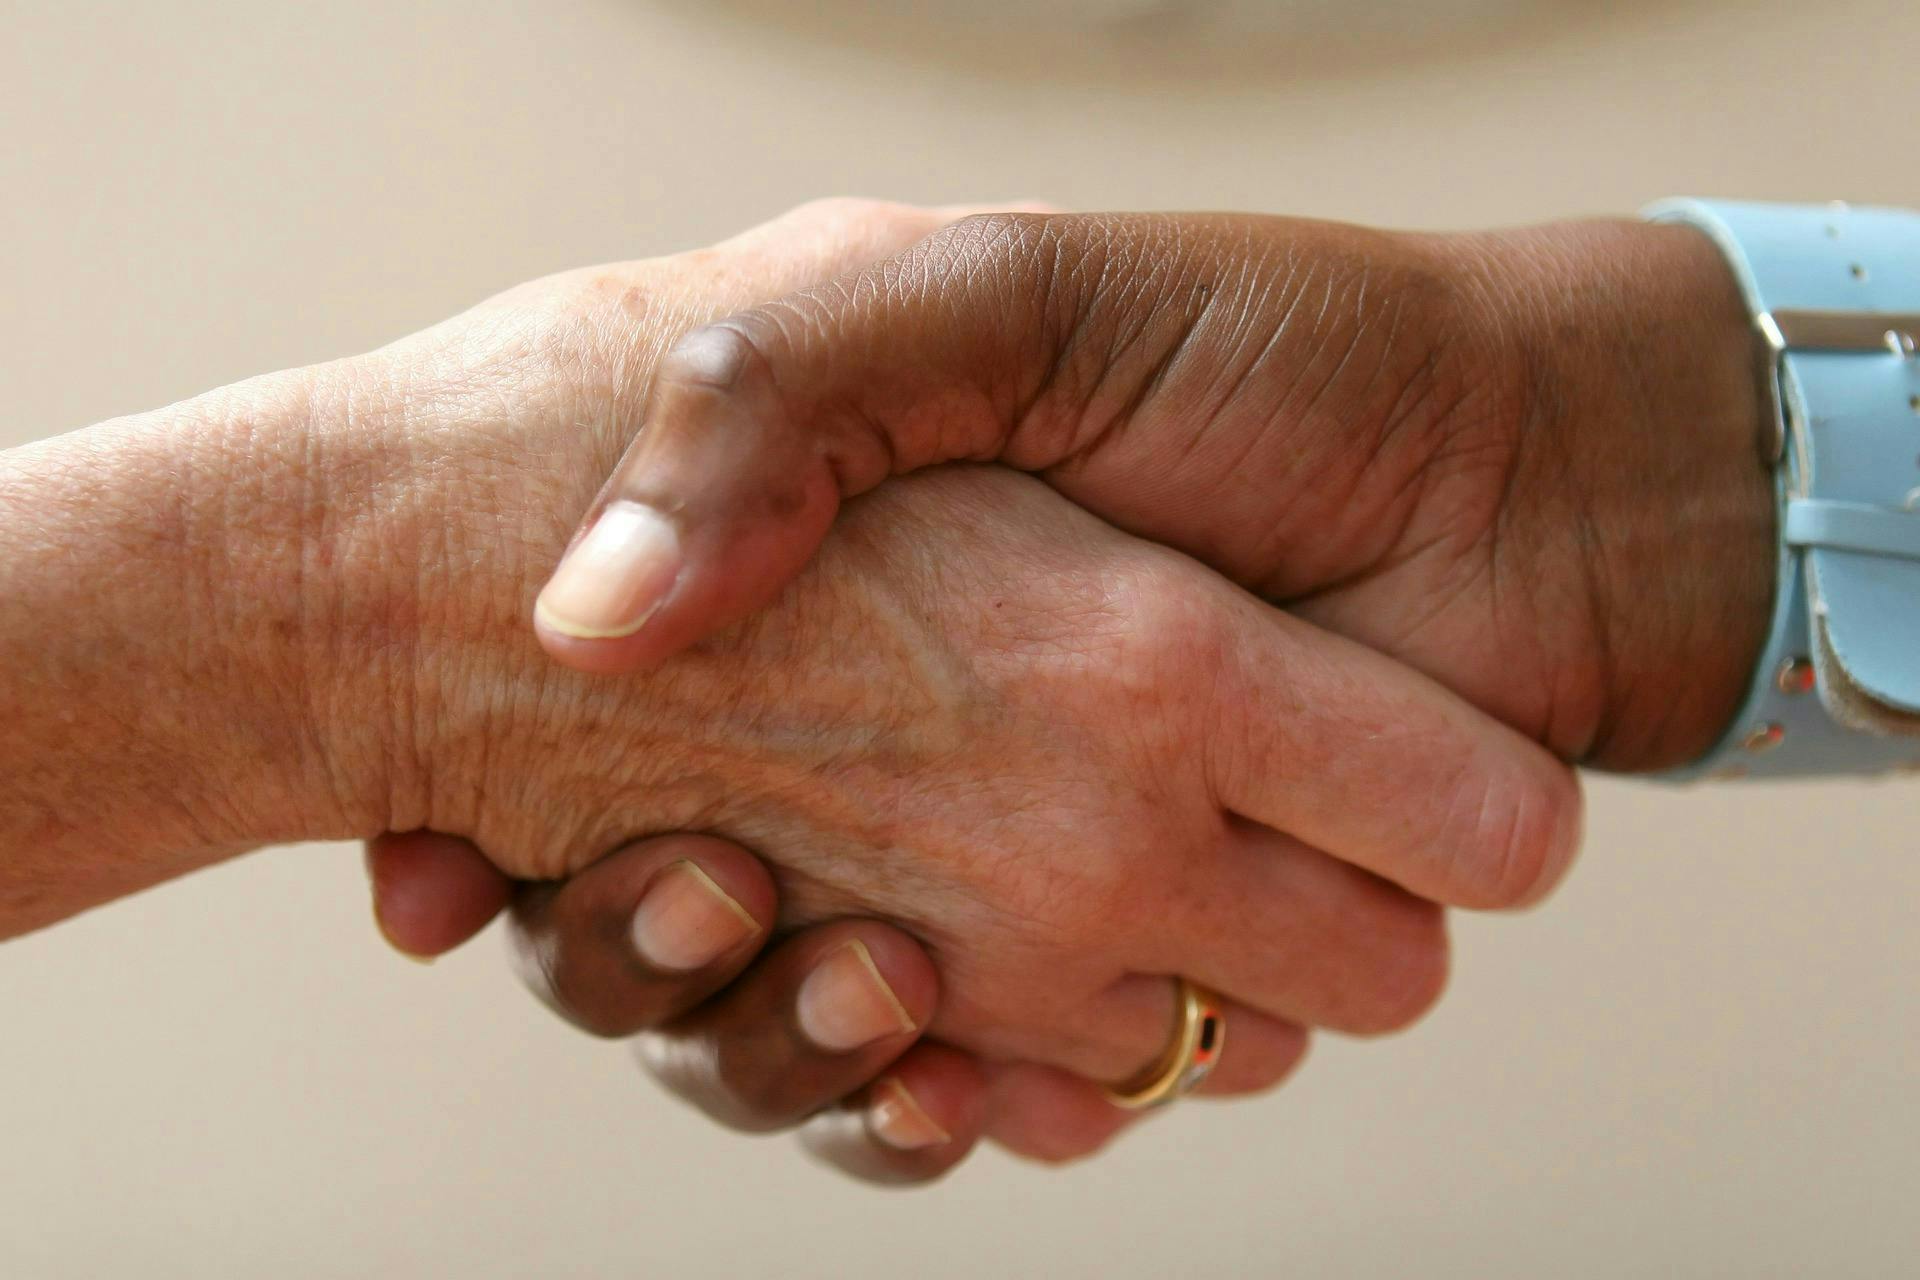 Close up image of a handshake between two people.